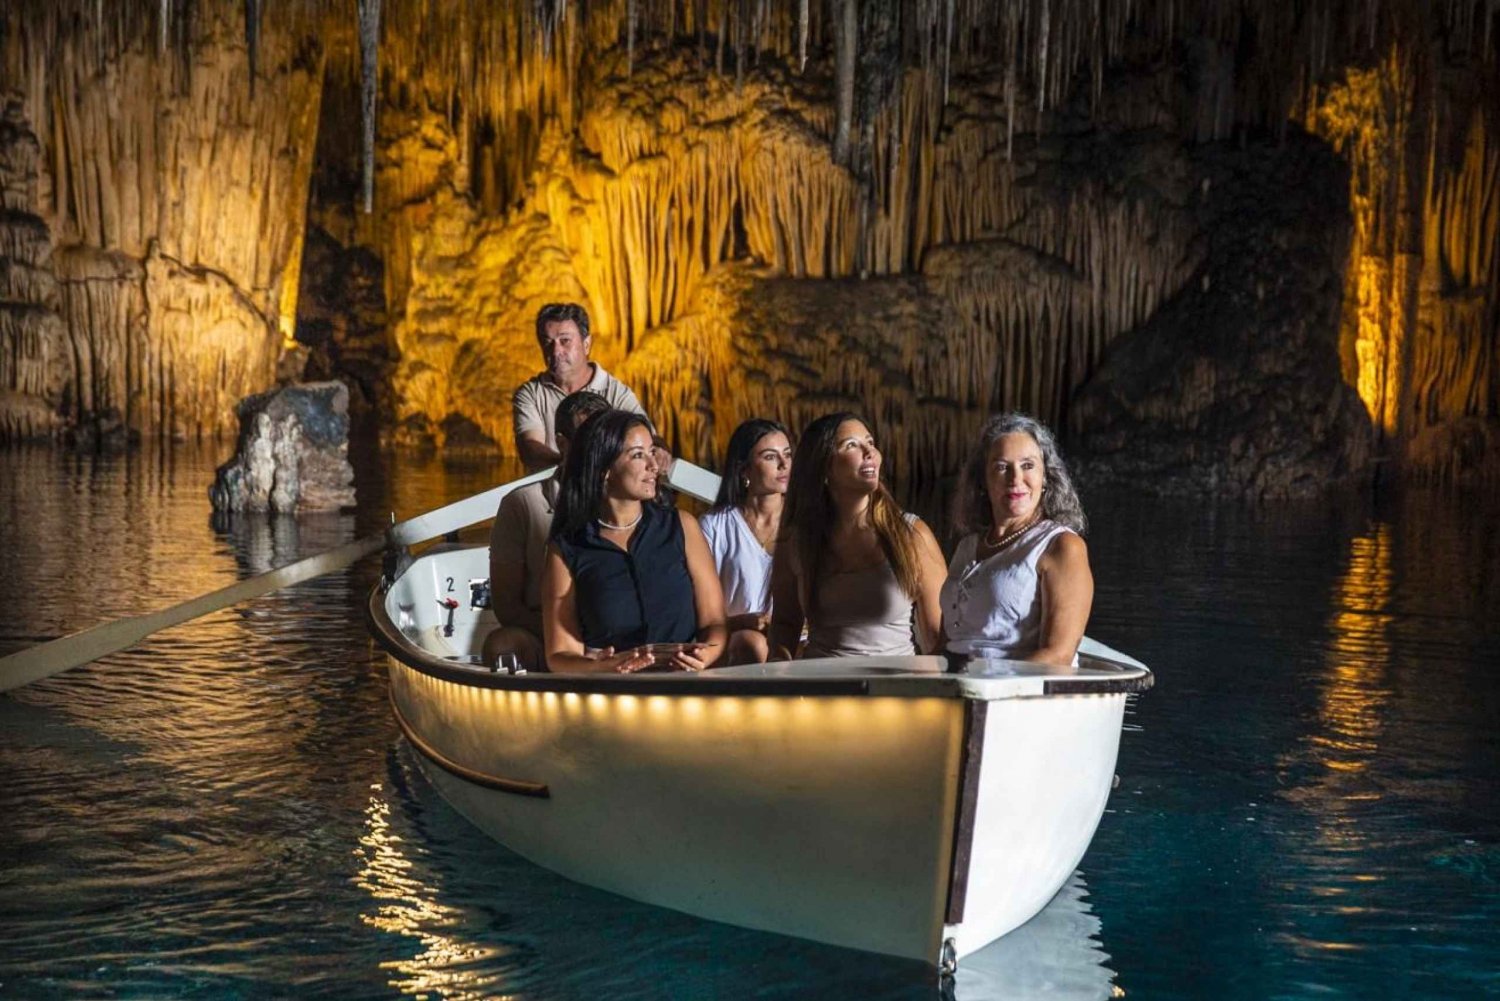 Caves of Drach: Entrance, Music Concert and Boat Trip